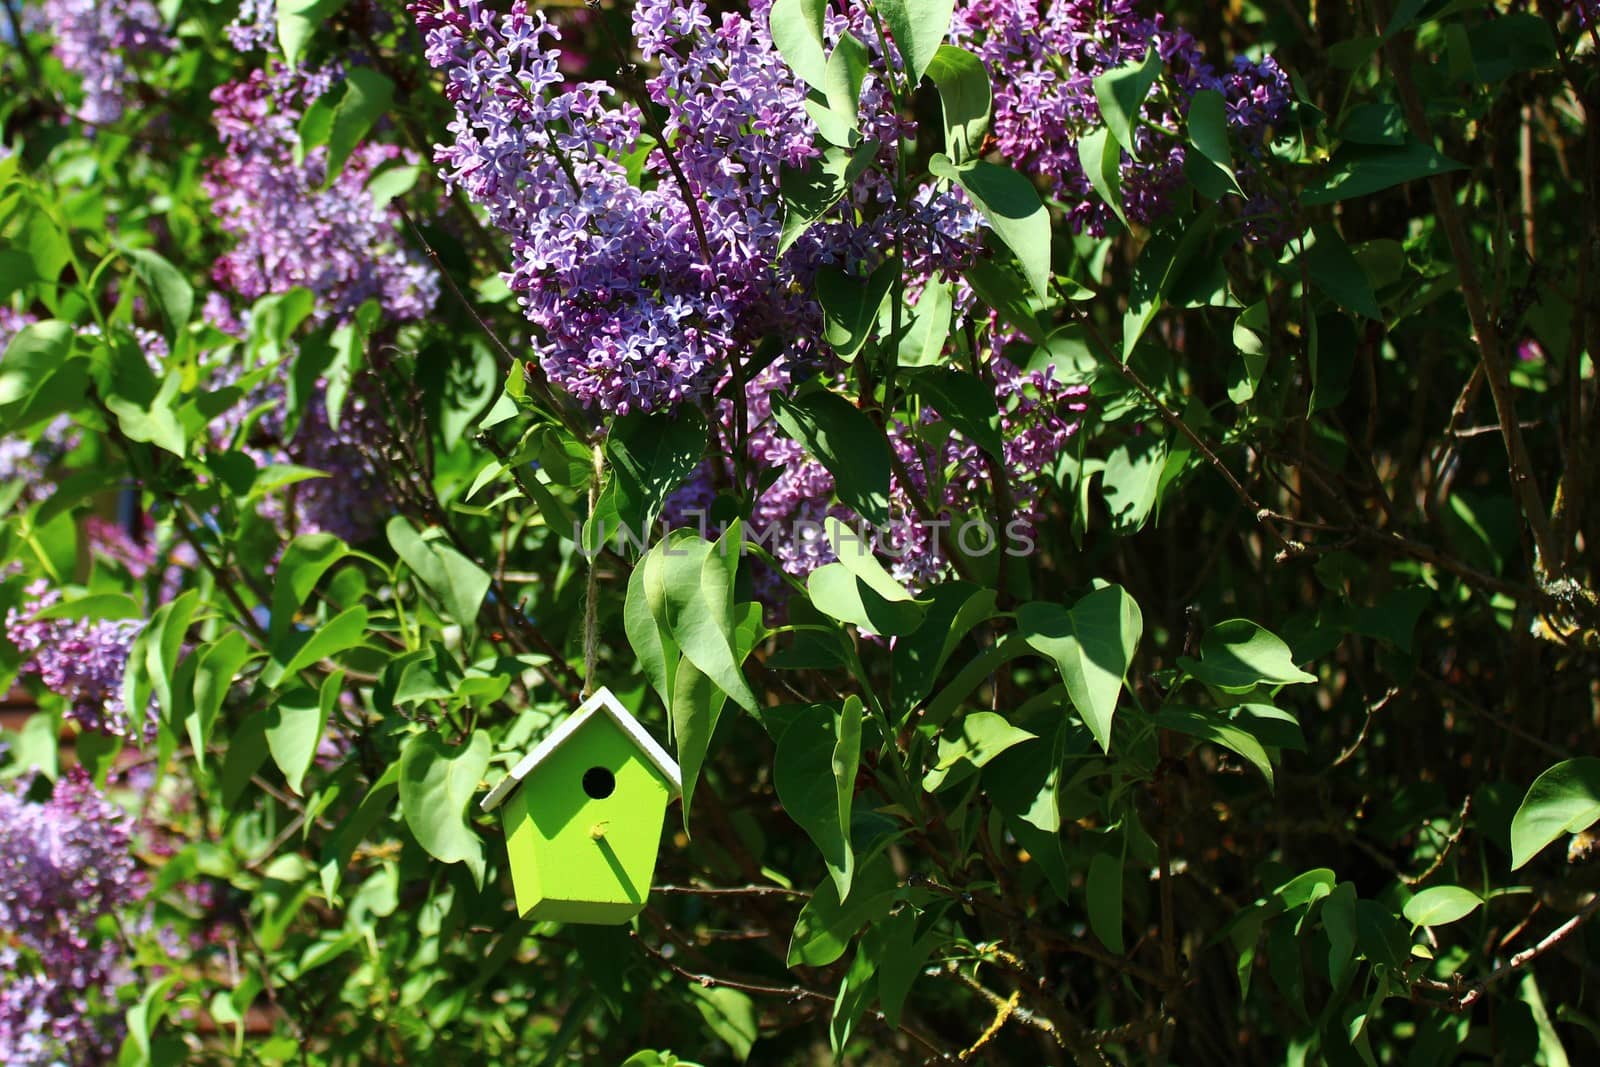 The picture shows a bird house in the lilac.